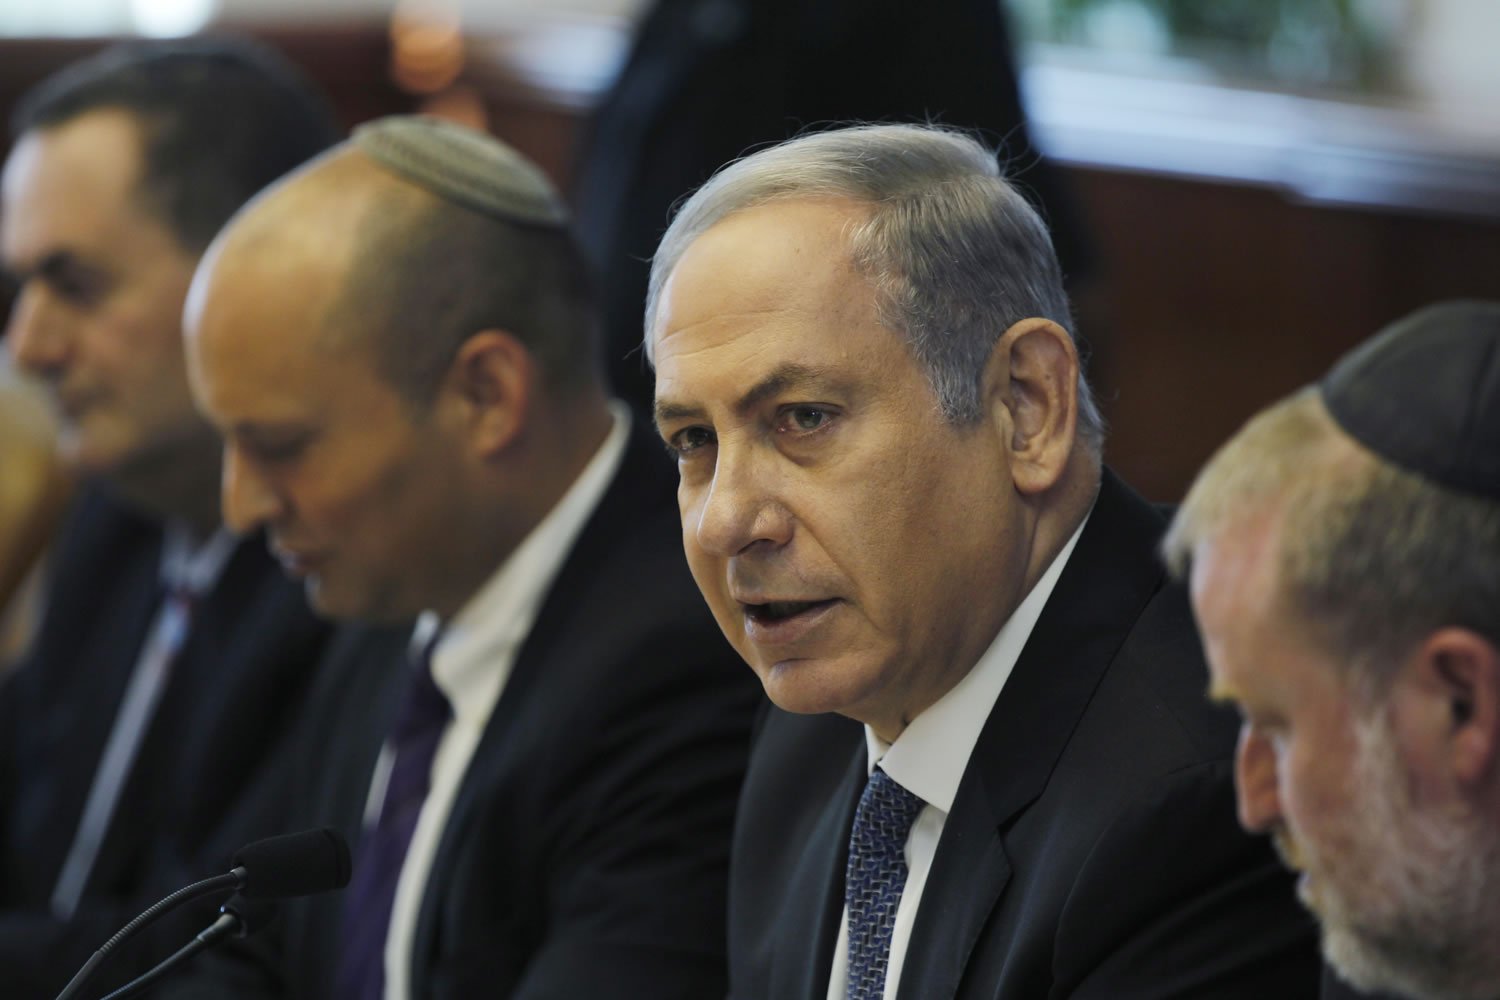 Israel's Prime Minister Benjamin Netanyahu attends the weekly cabinet meeting at his office in Jerusalem on Monday, Aug. 31, 2015.